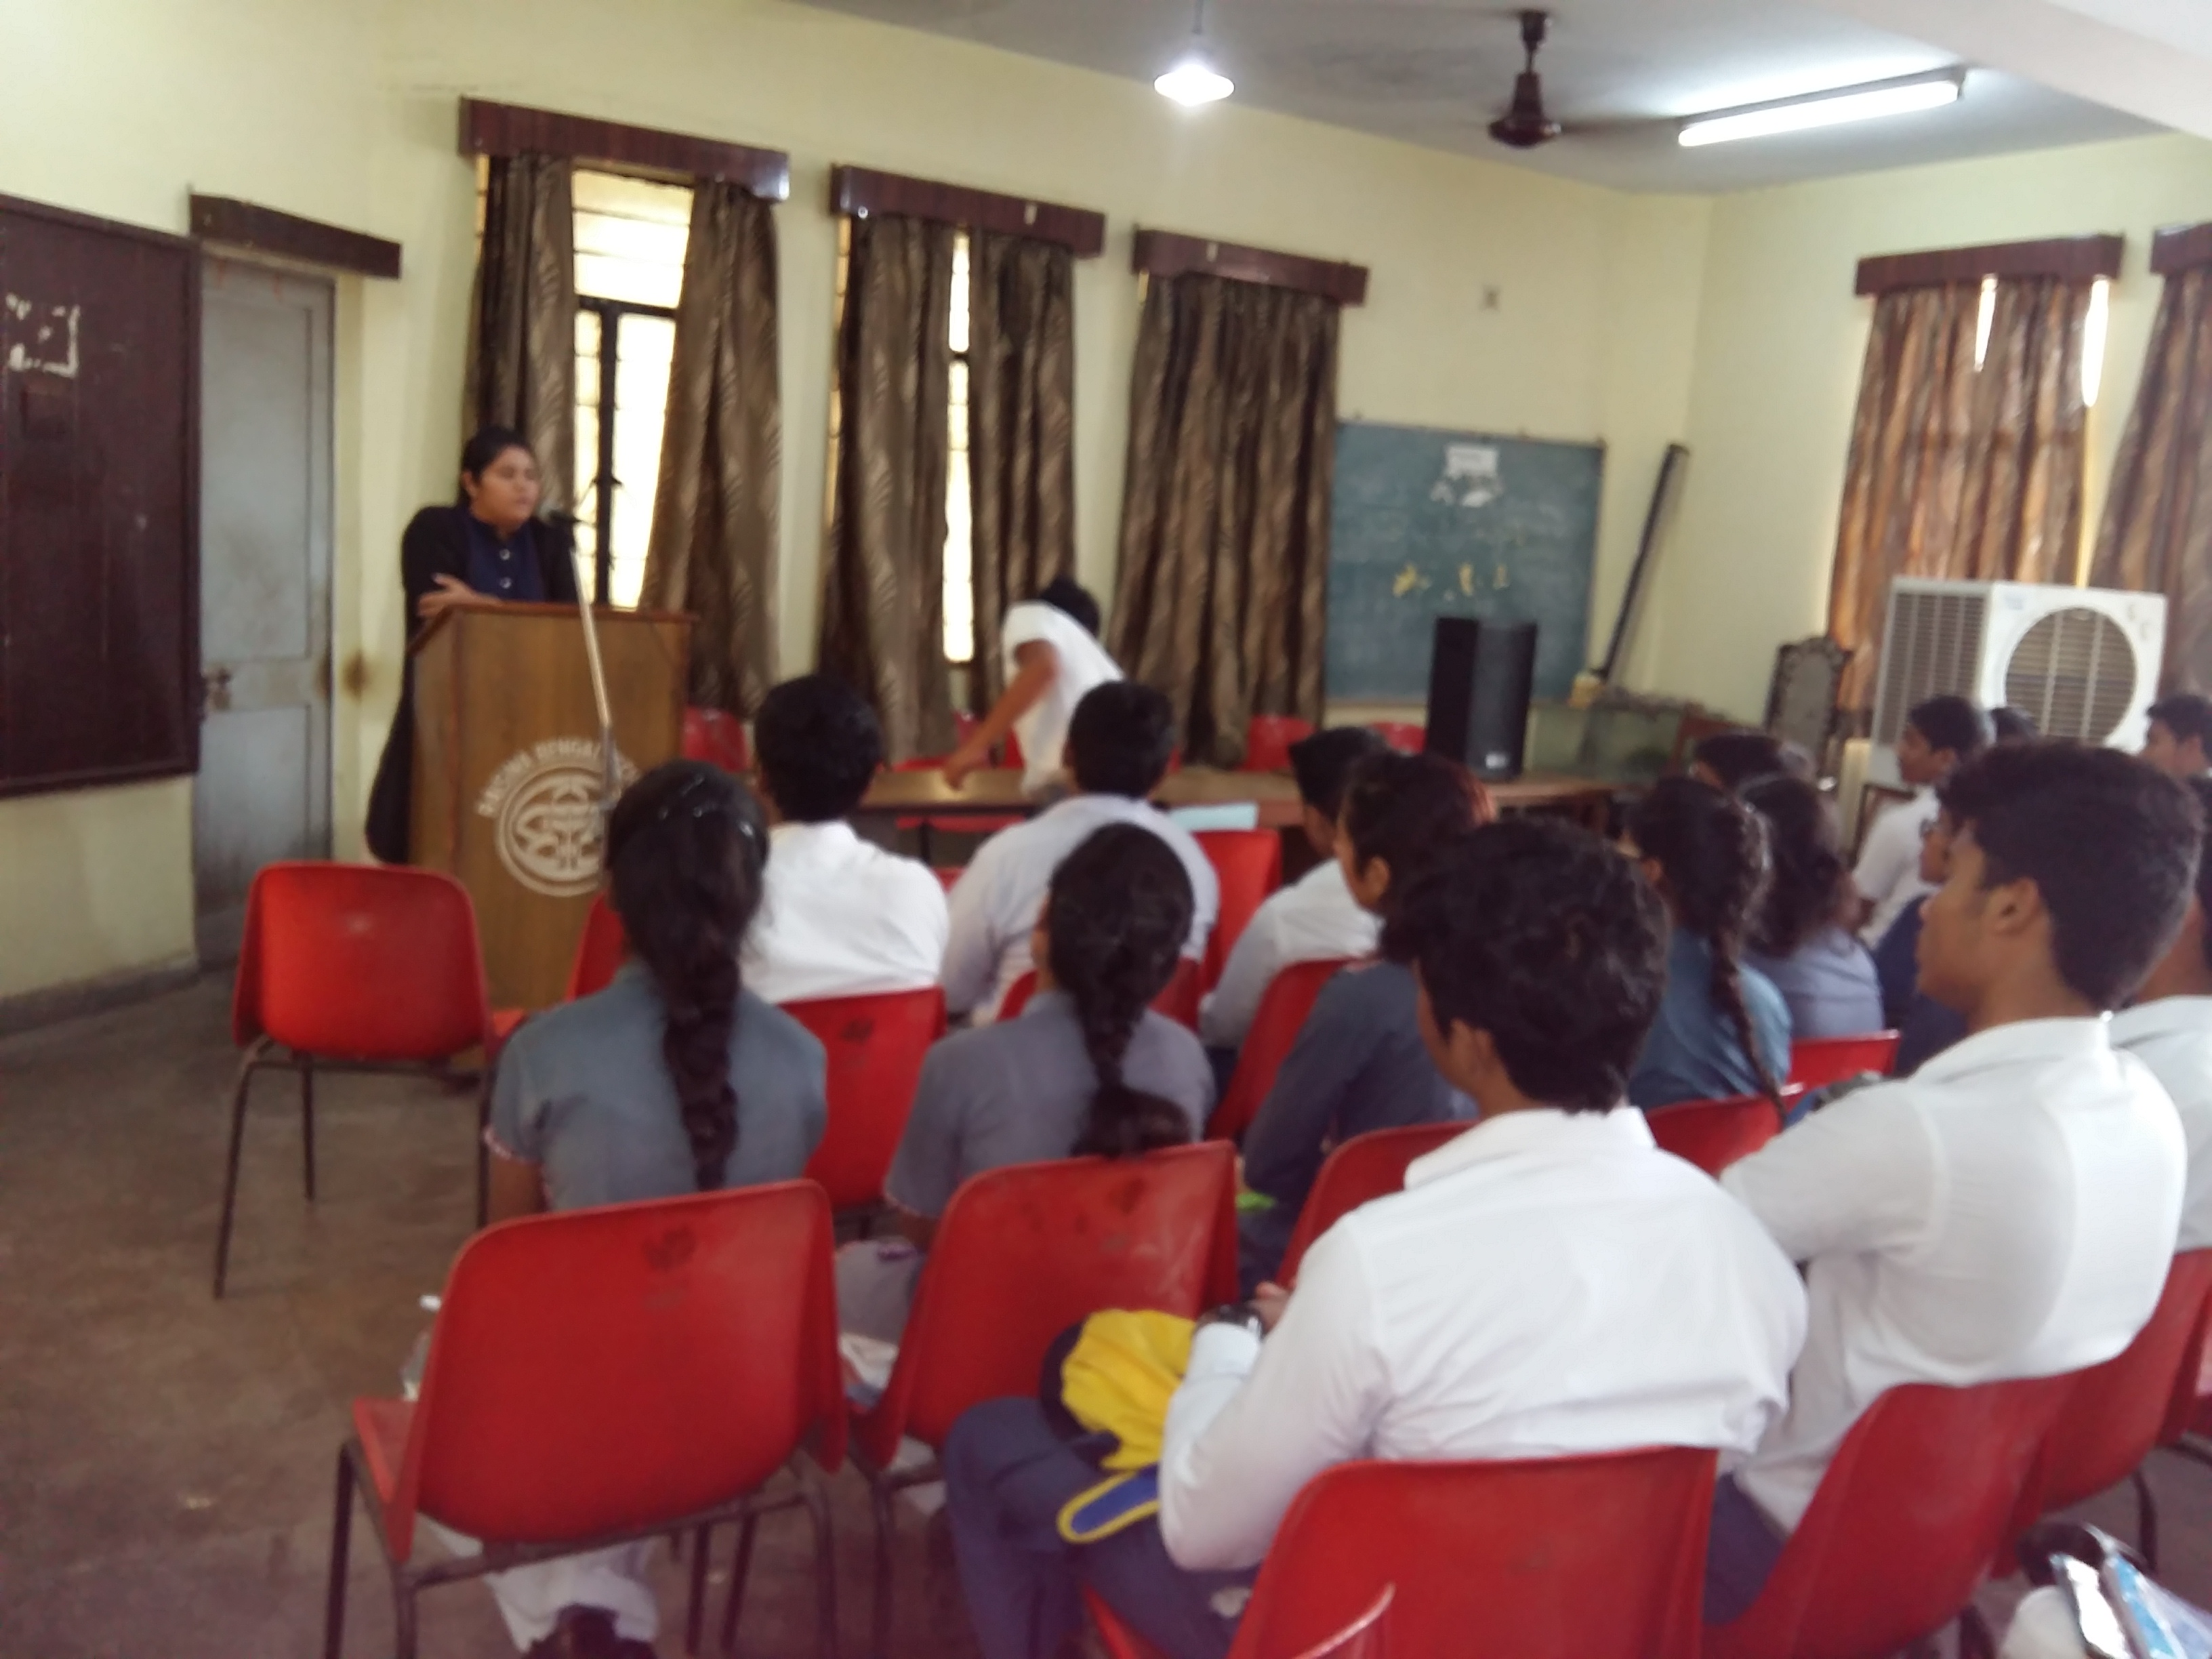 Legal Literacy Program was held on 28.07.2016 on the topic of “General Legal Awareness” at Raisina Bengali School, Mandir Marg ND.